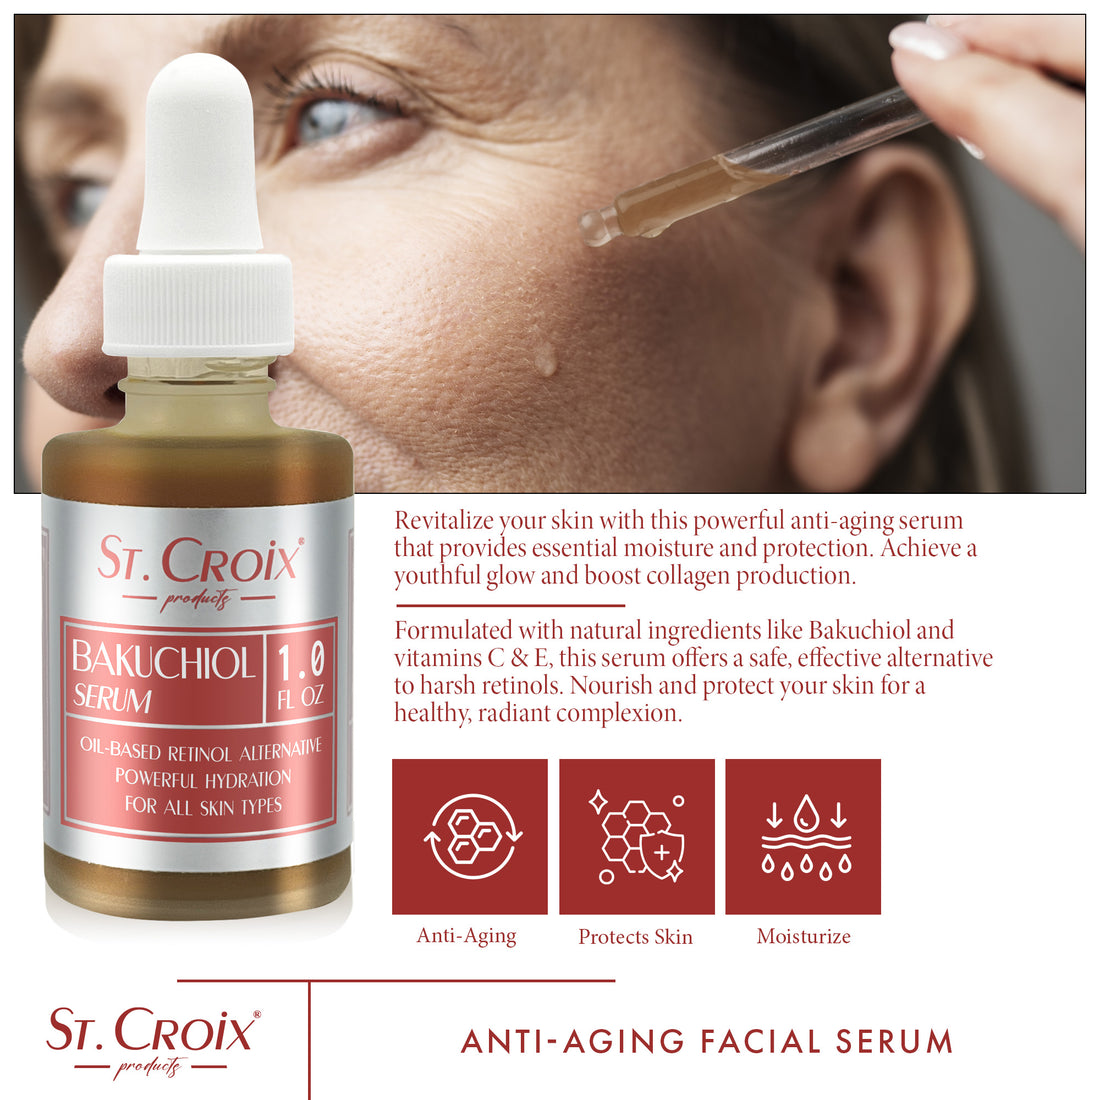 Gentle Anti-Aging Serum from St. Croix Products